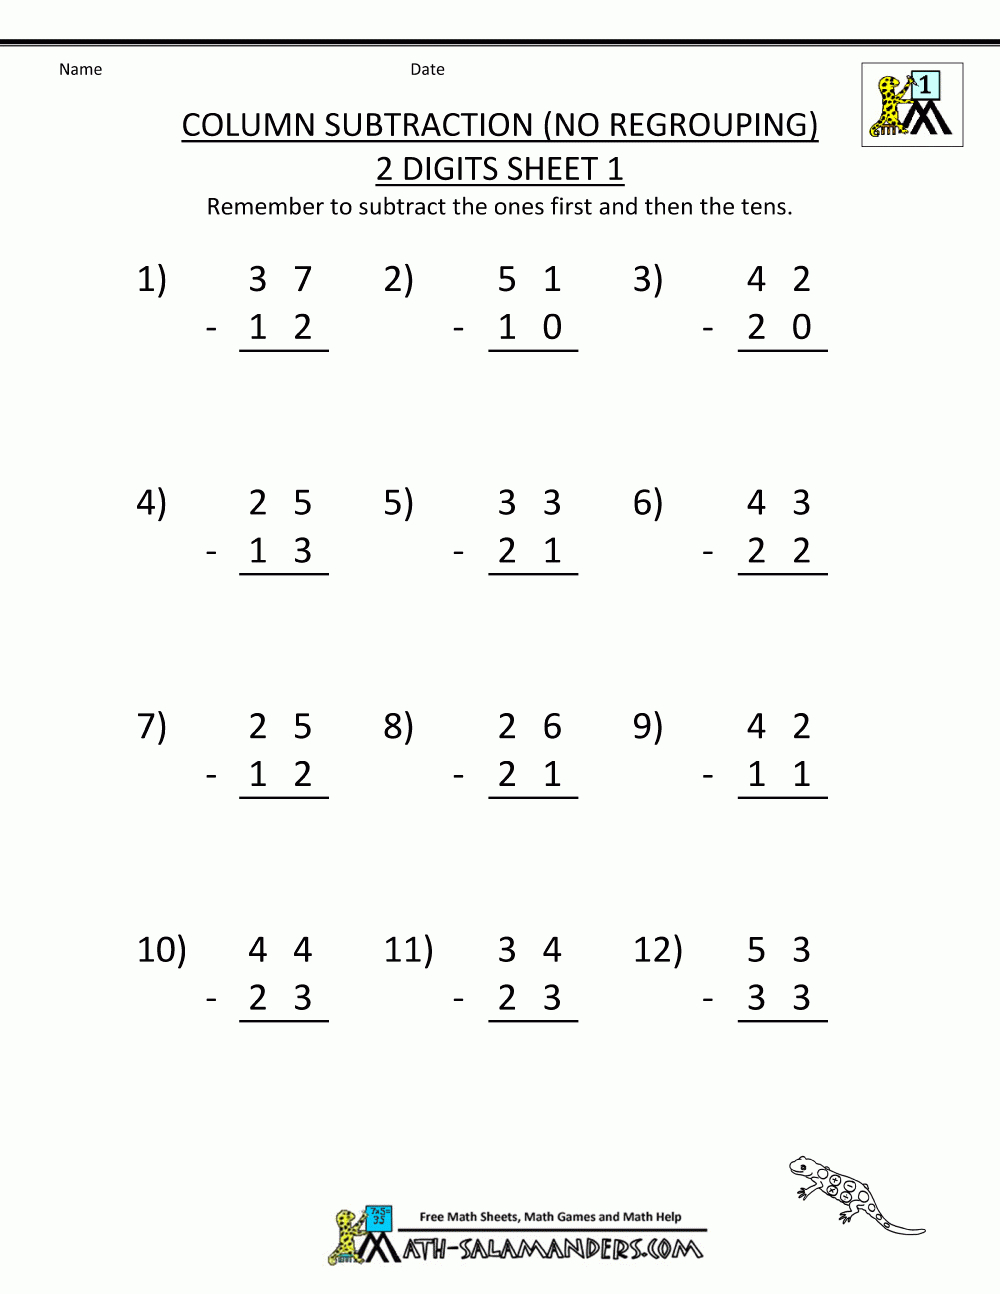 2 Digit Subtraction Worksheets | Printable Subtraction Worksheets With Regrouping